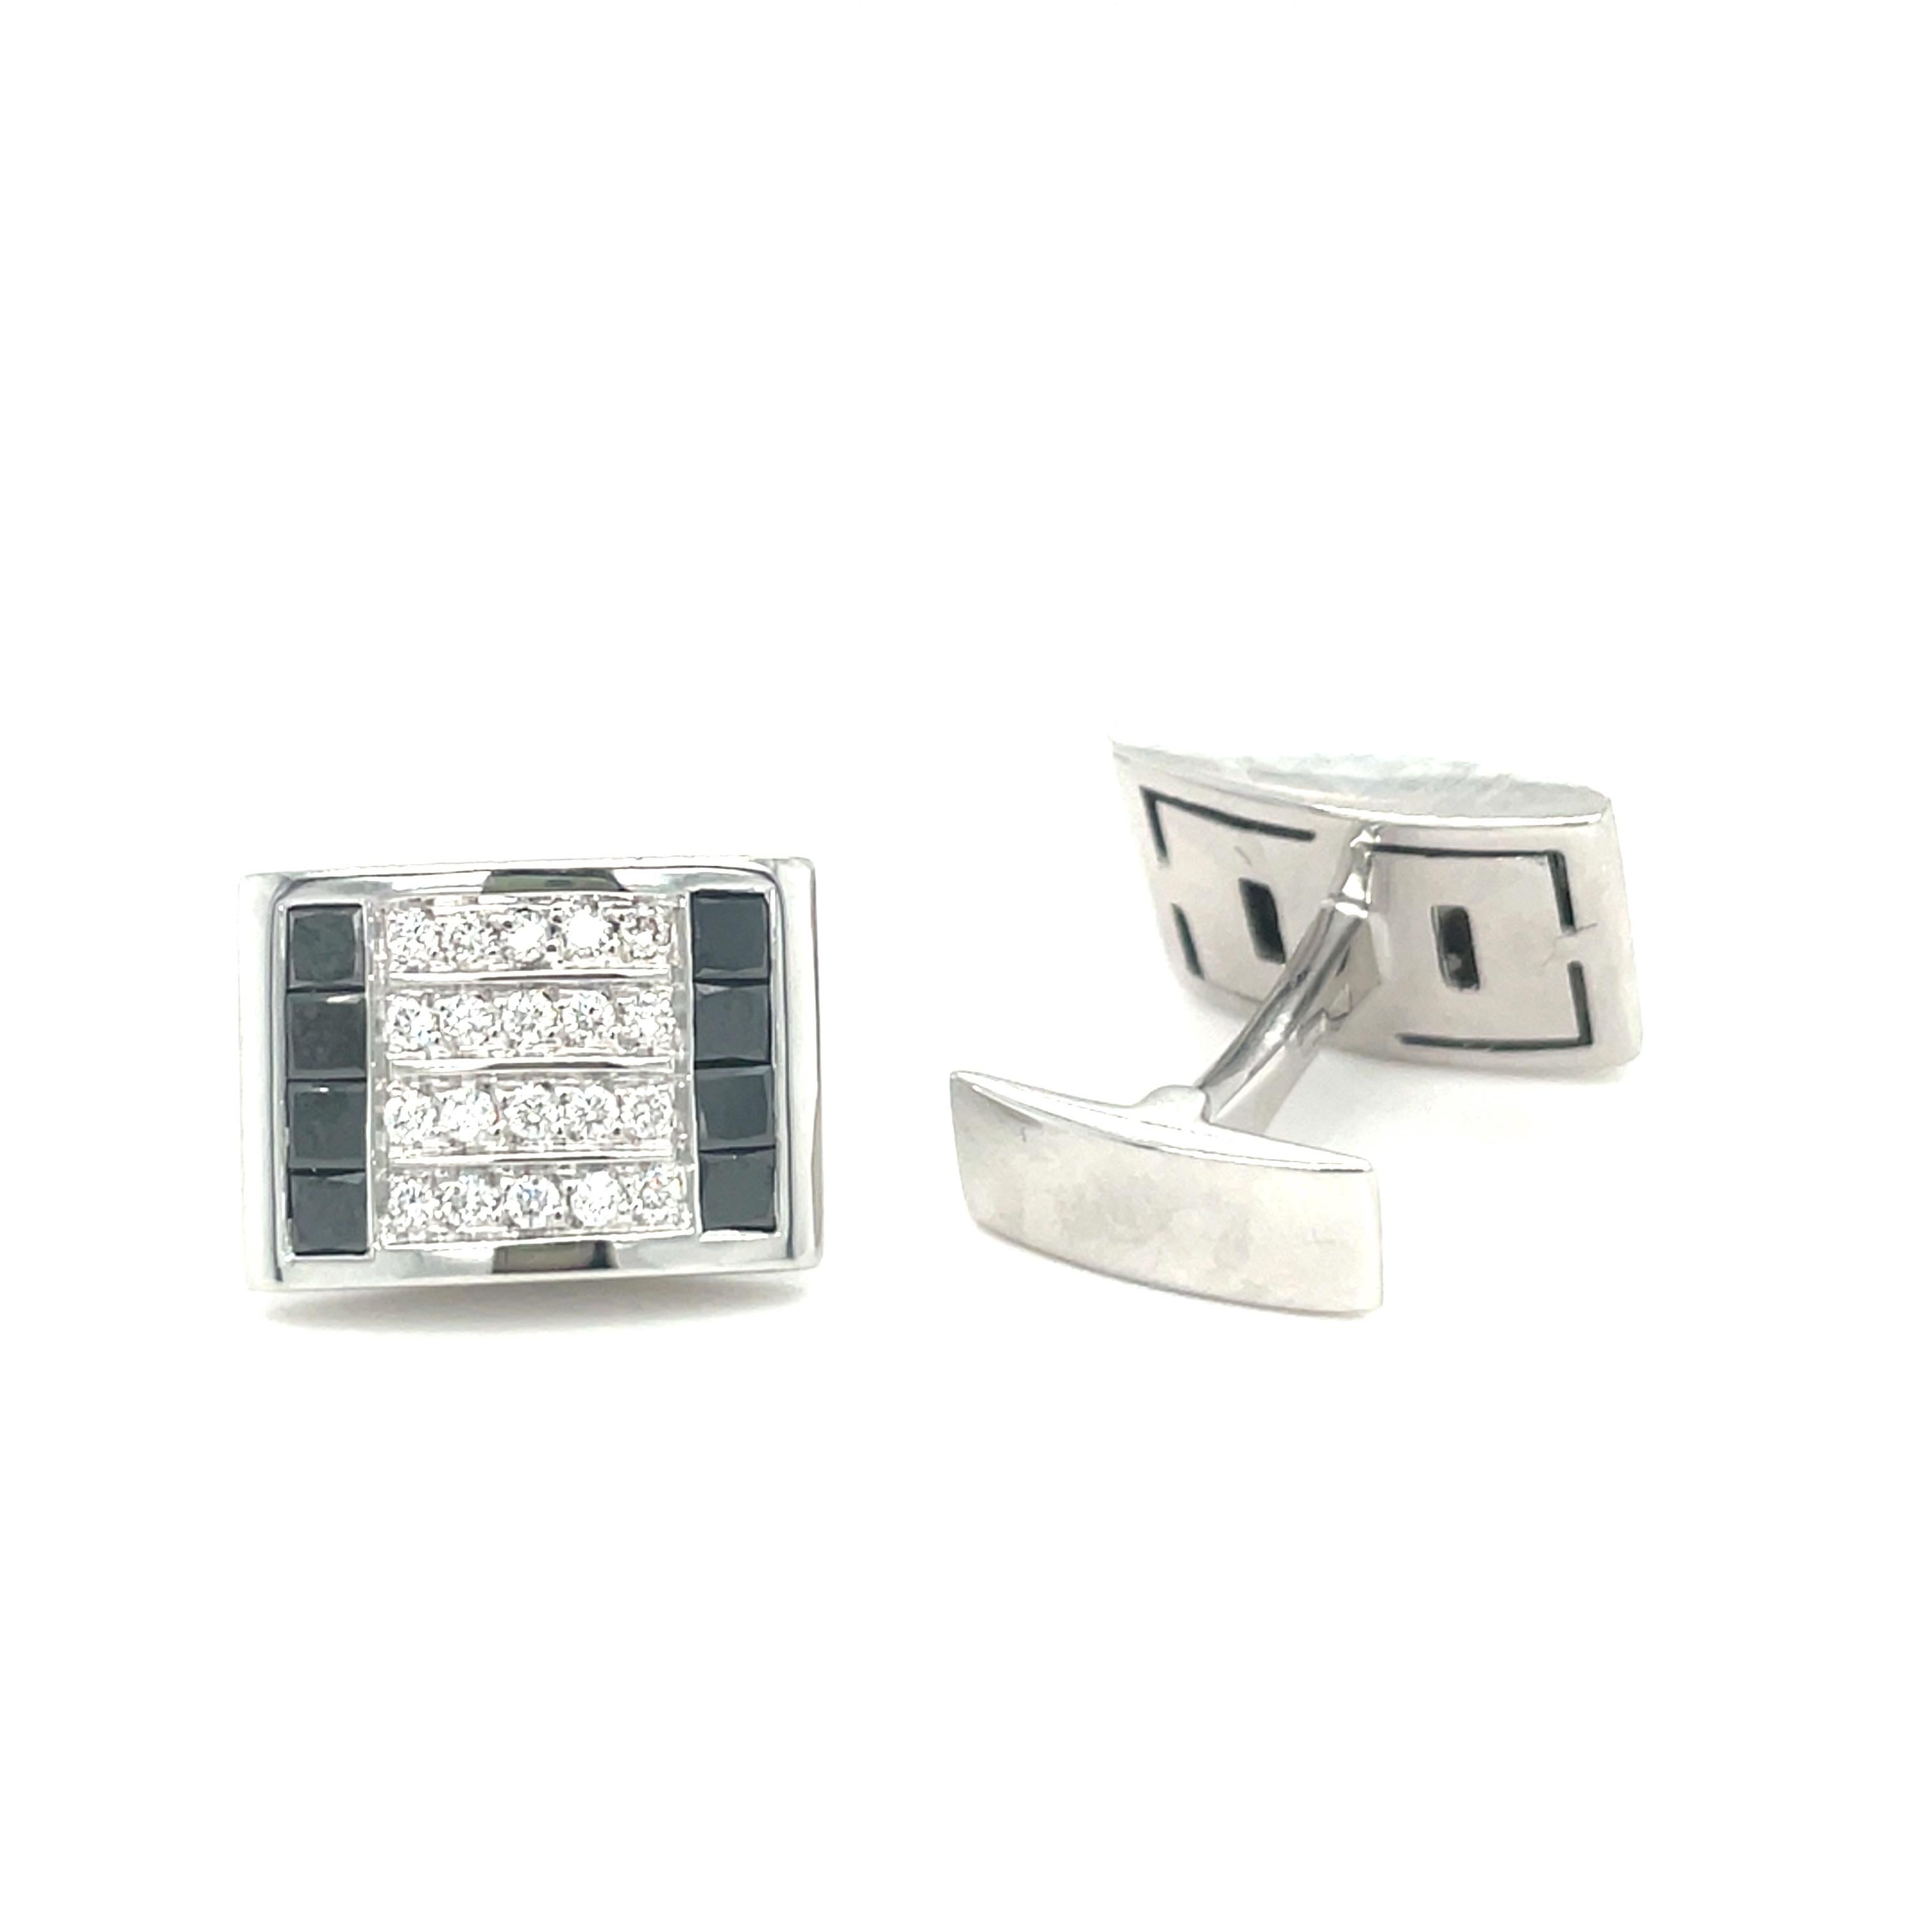 These 18K white gold cufflinks are from timeless Collection. These very elegant cufflinks are made with white  gold, black diamonds 2.16 ct and diamonds G colors VS2 clarity in total of 0.68 Ct. Total metal weight is 15.45 gr. These cufflinks are a